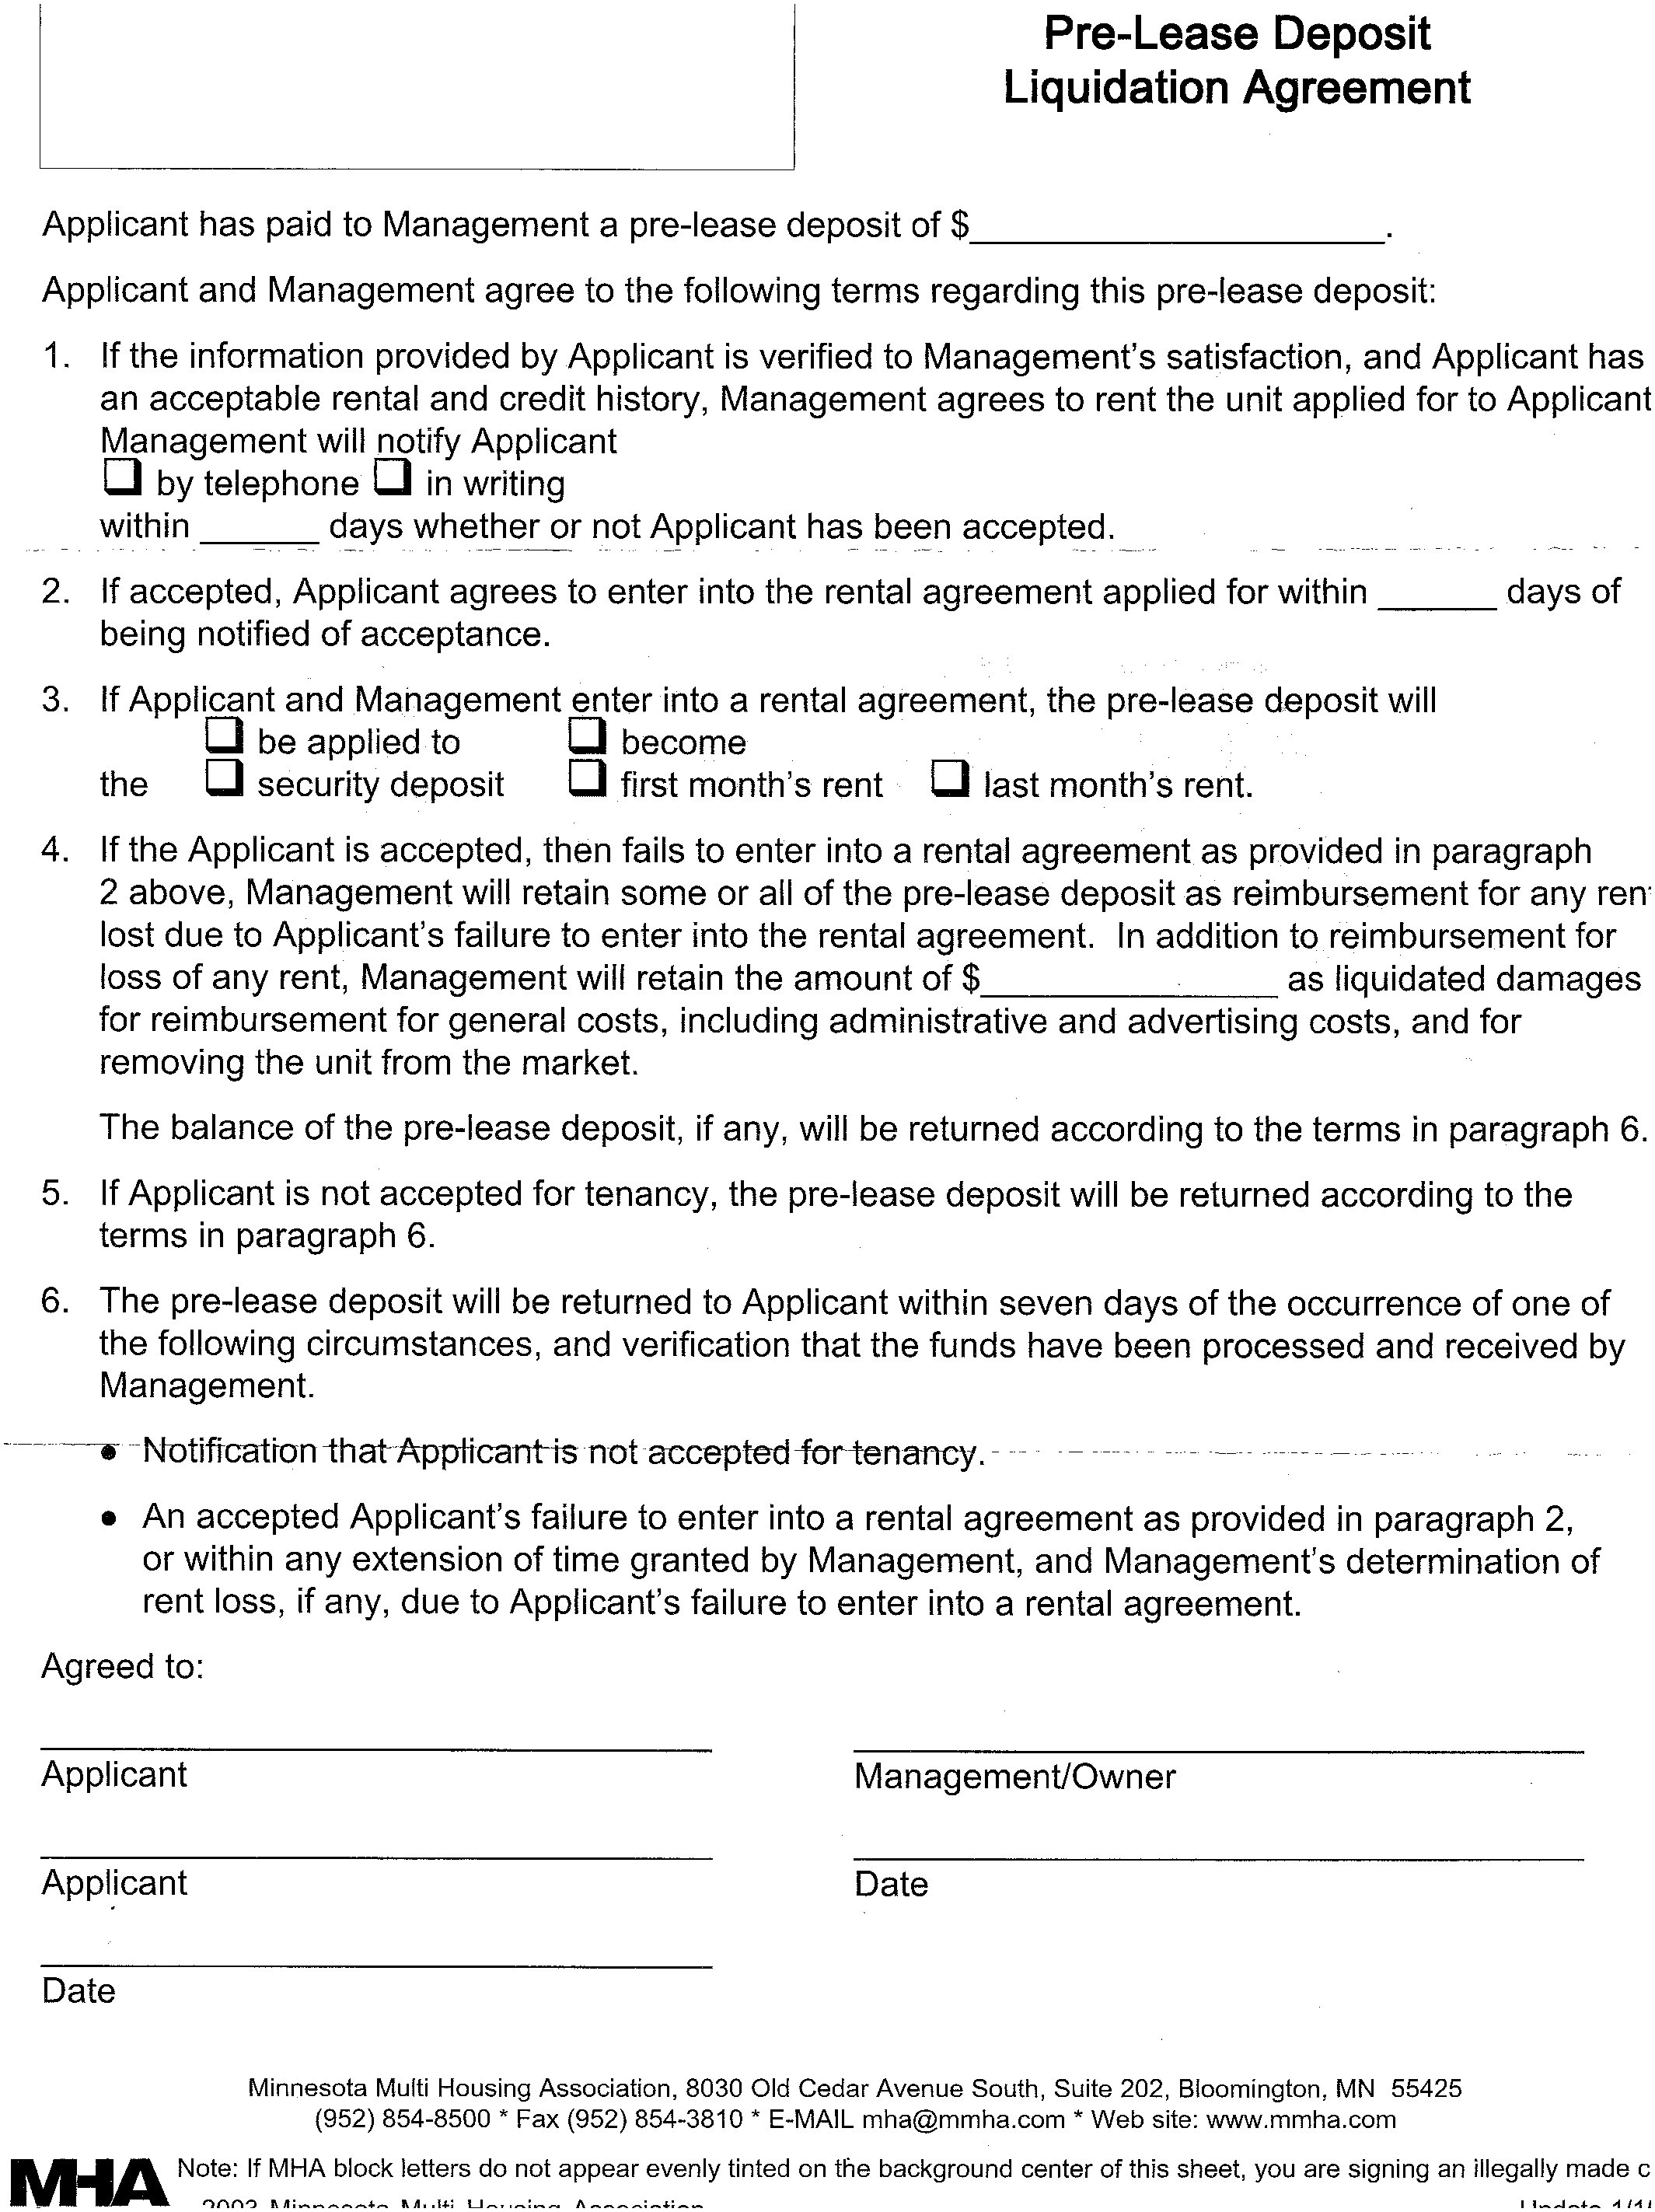 Commercial Lease Agreement Pdf Template Blank Example Stupendous Free Texas